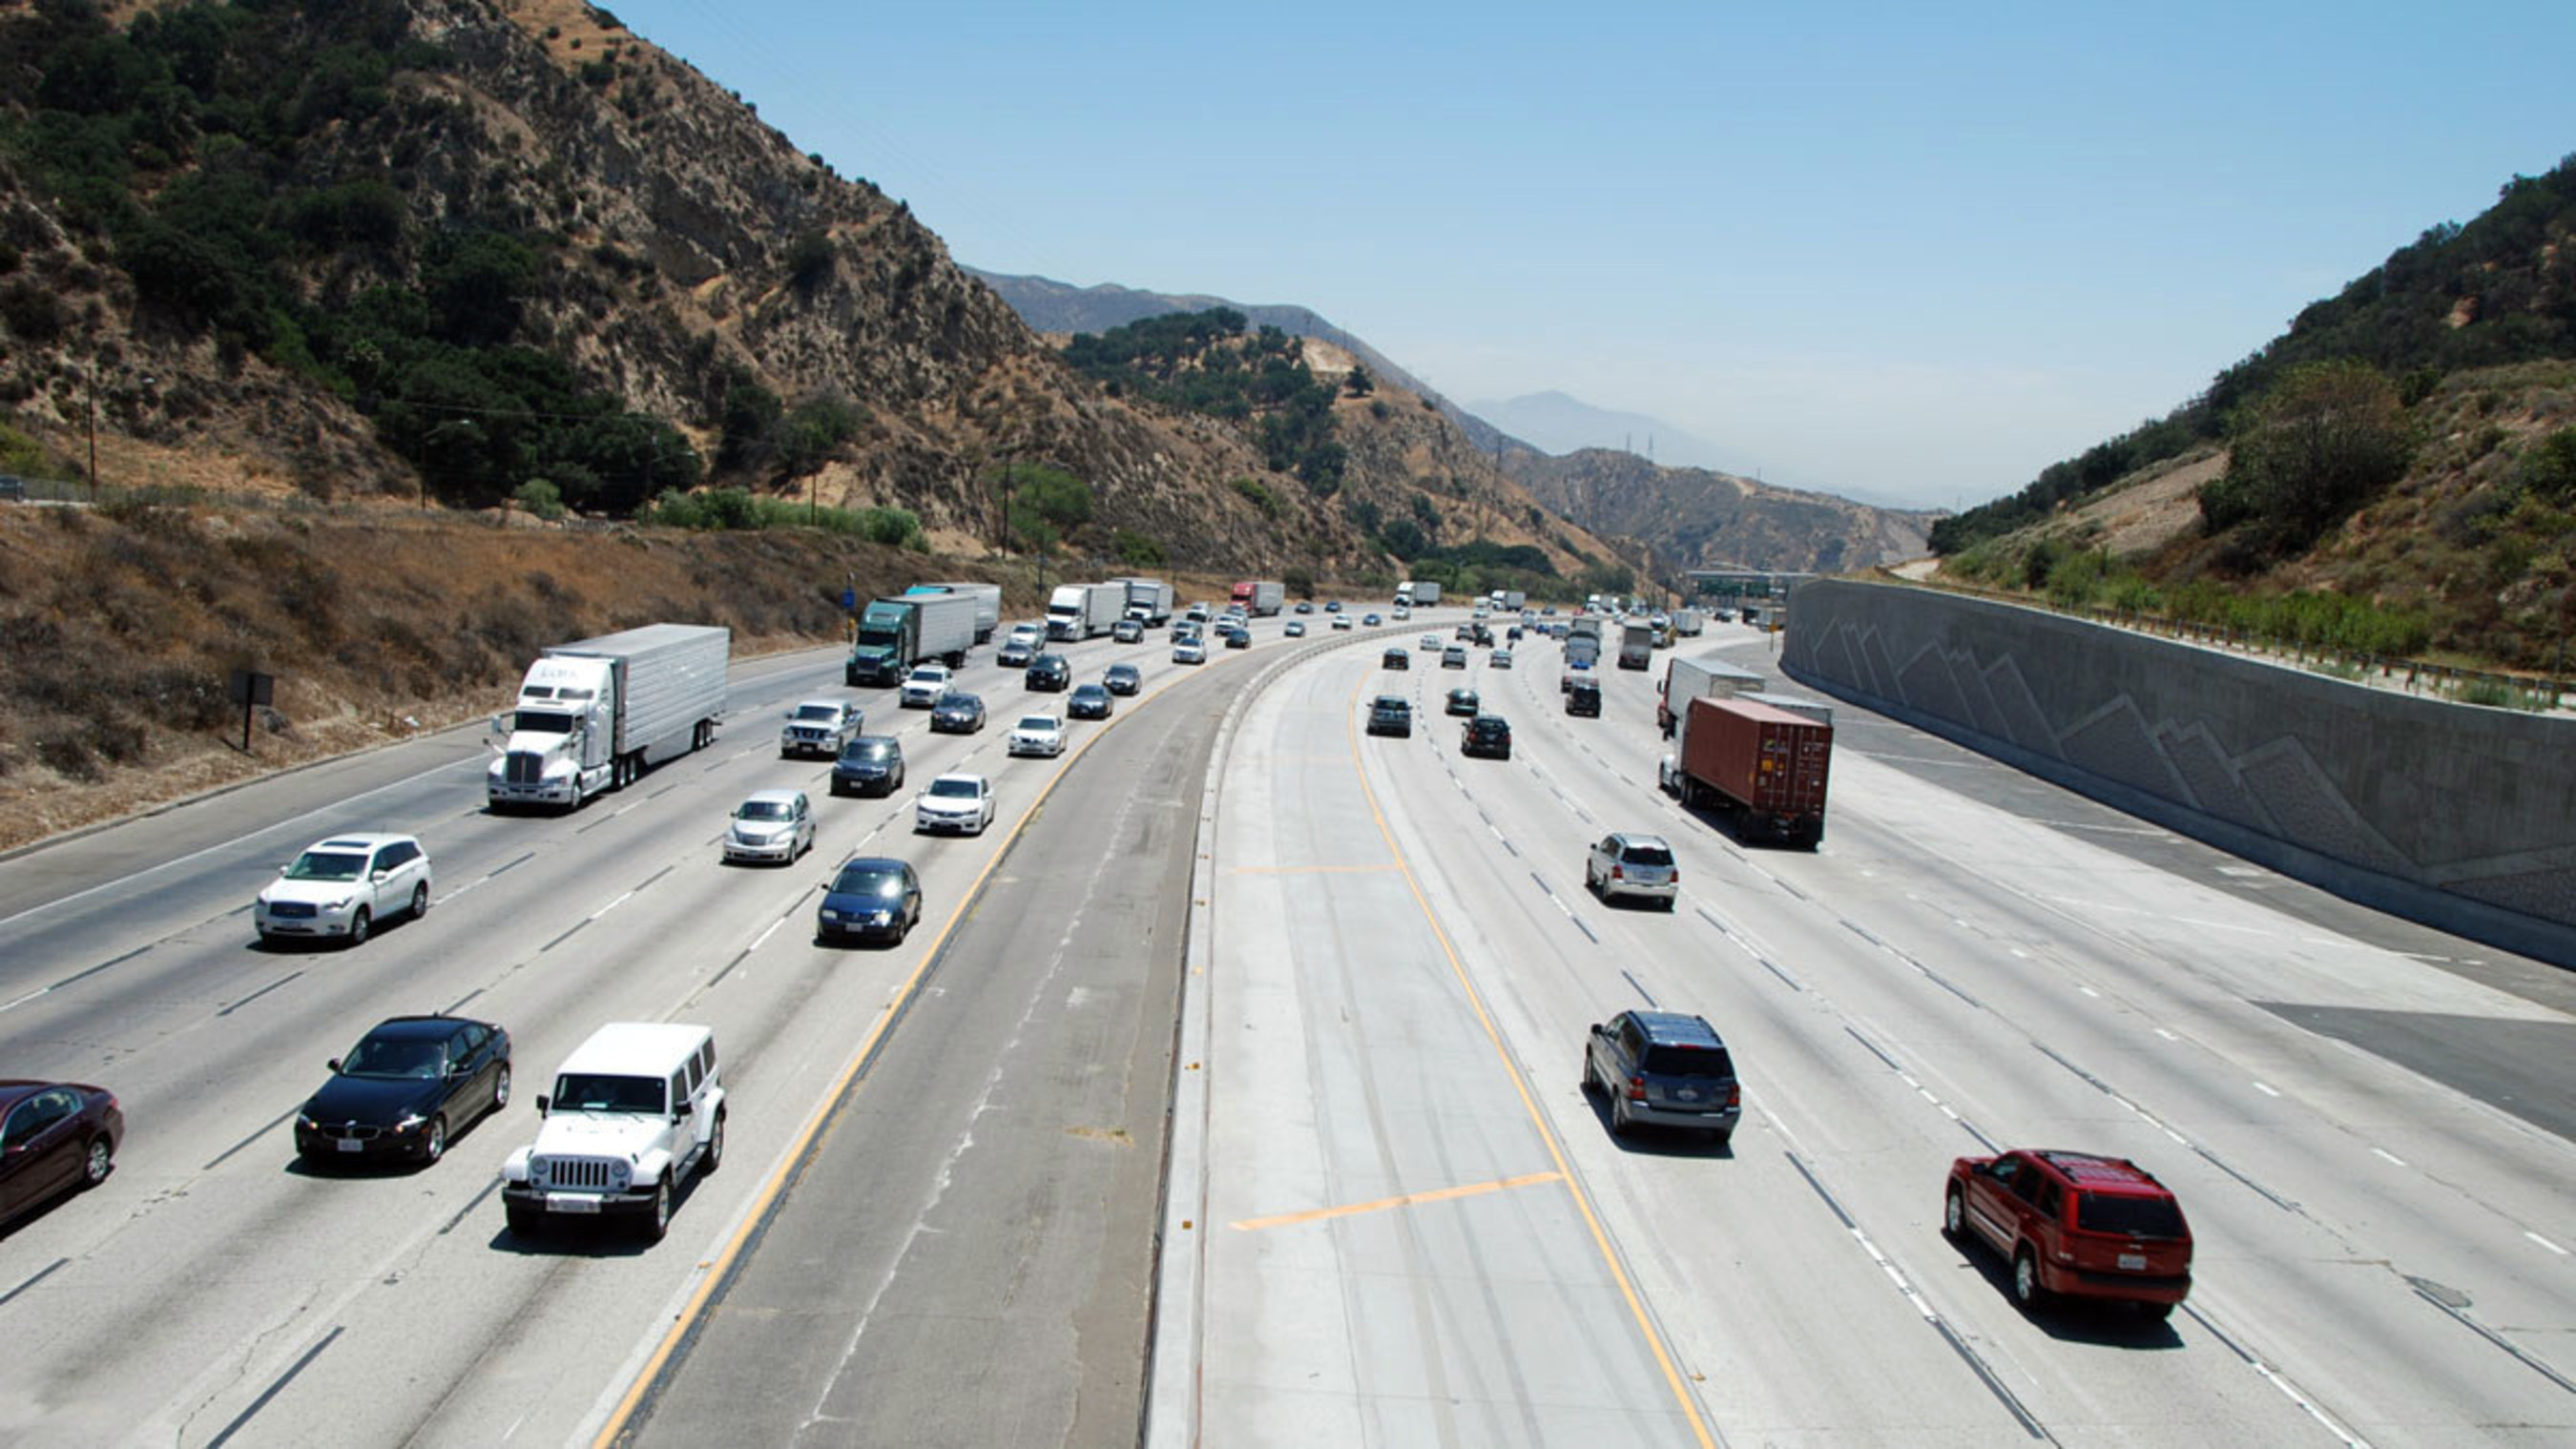 The Los Angeles County Metropolitan Transportation Authority (Metro) has selected a team led by CH2M to provide the Plans, Specifications & Estimates (PS&E) for the design of new high occupancy vehicle (HOV) lanes along 14 miles of Interstate 5 (I-5).